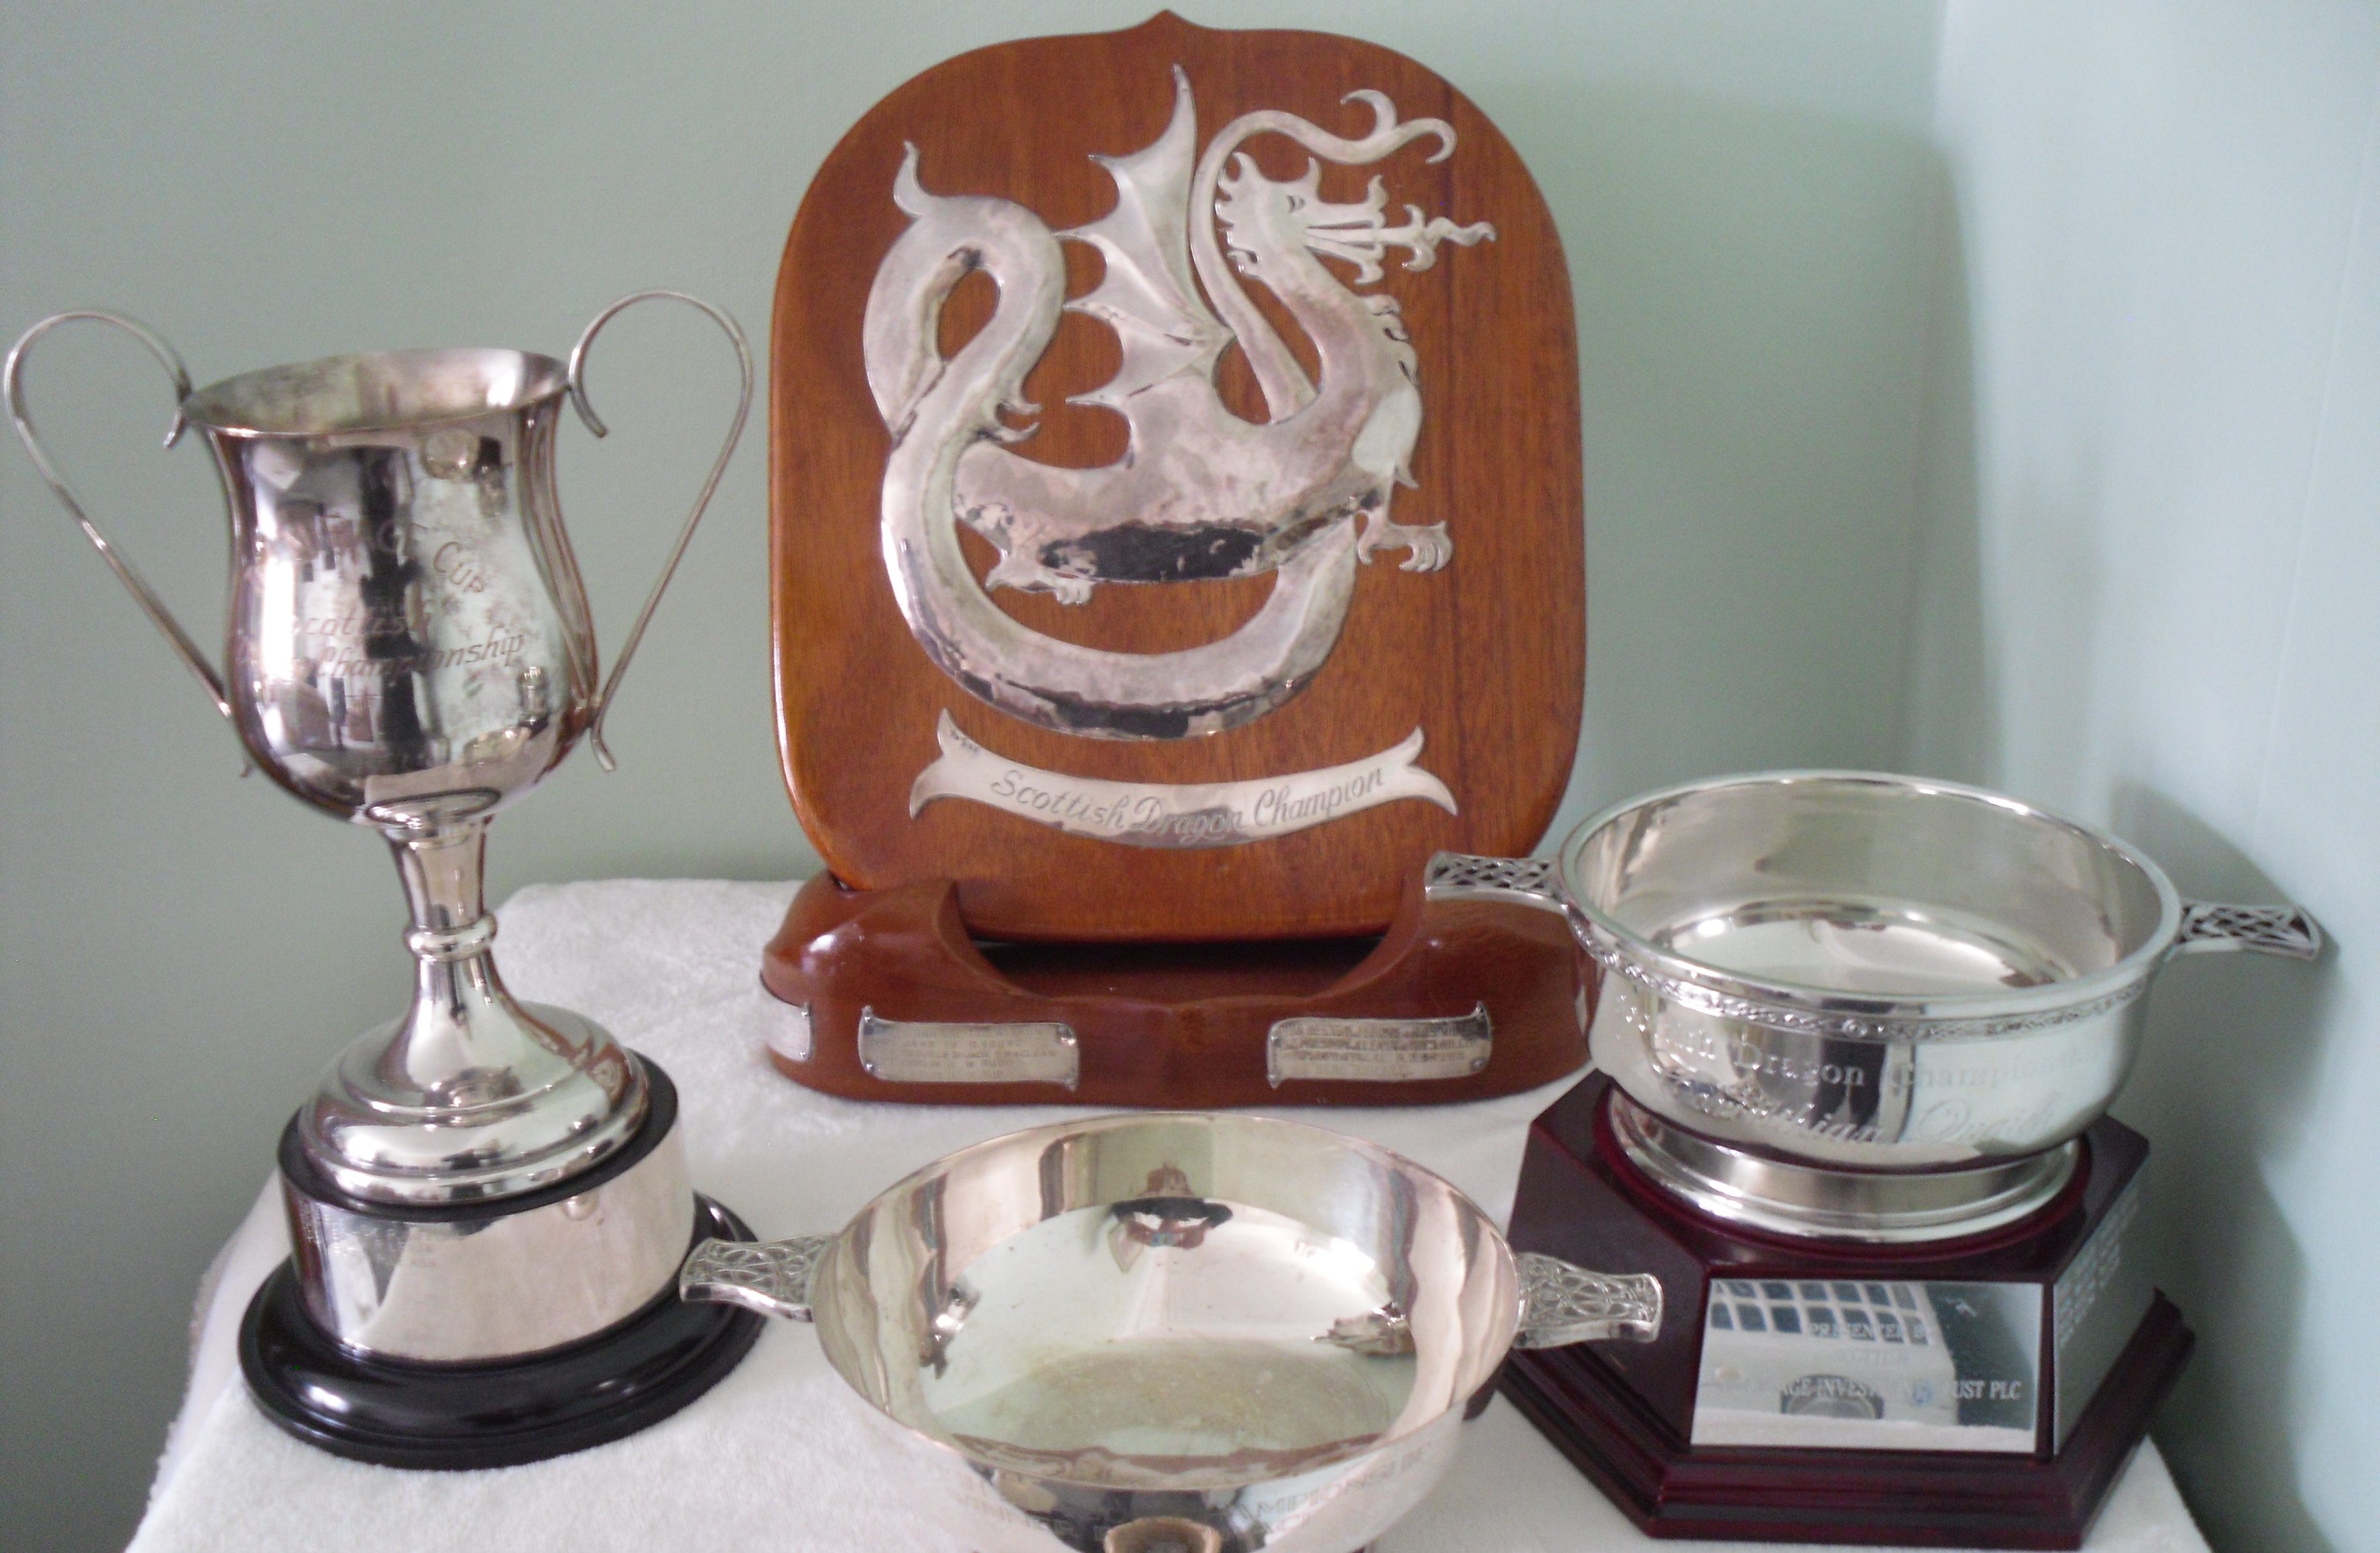 four Dragon keelboat sailing trophies